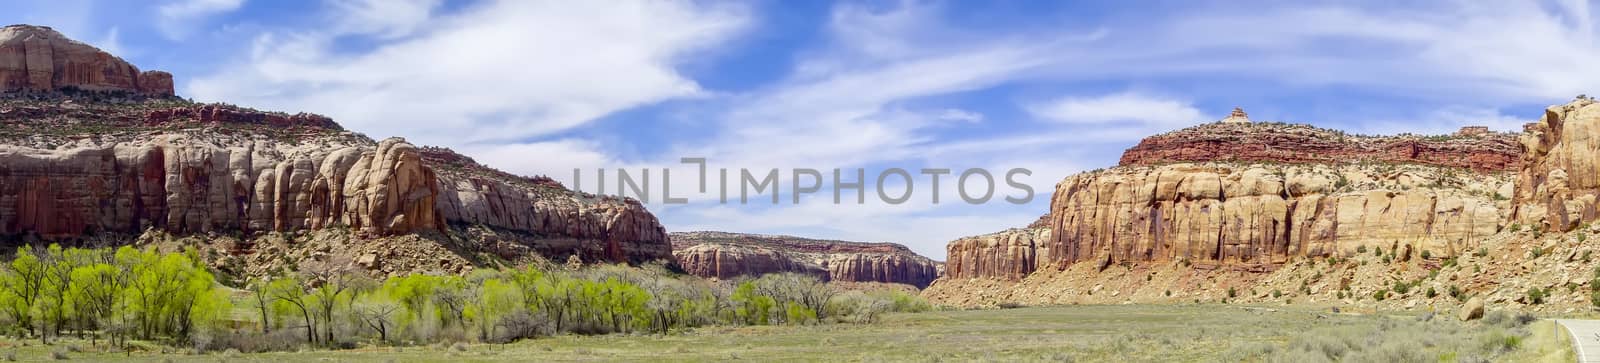 glen canyon mountains and geological formations by digidreamgrafix